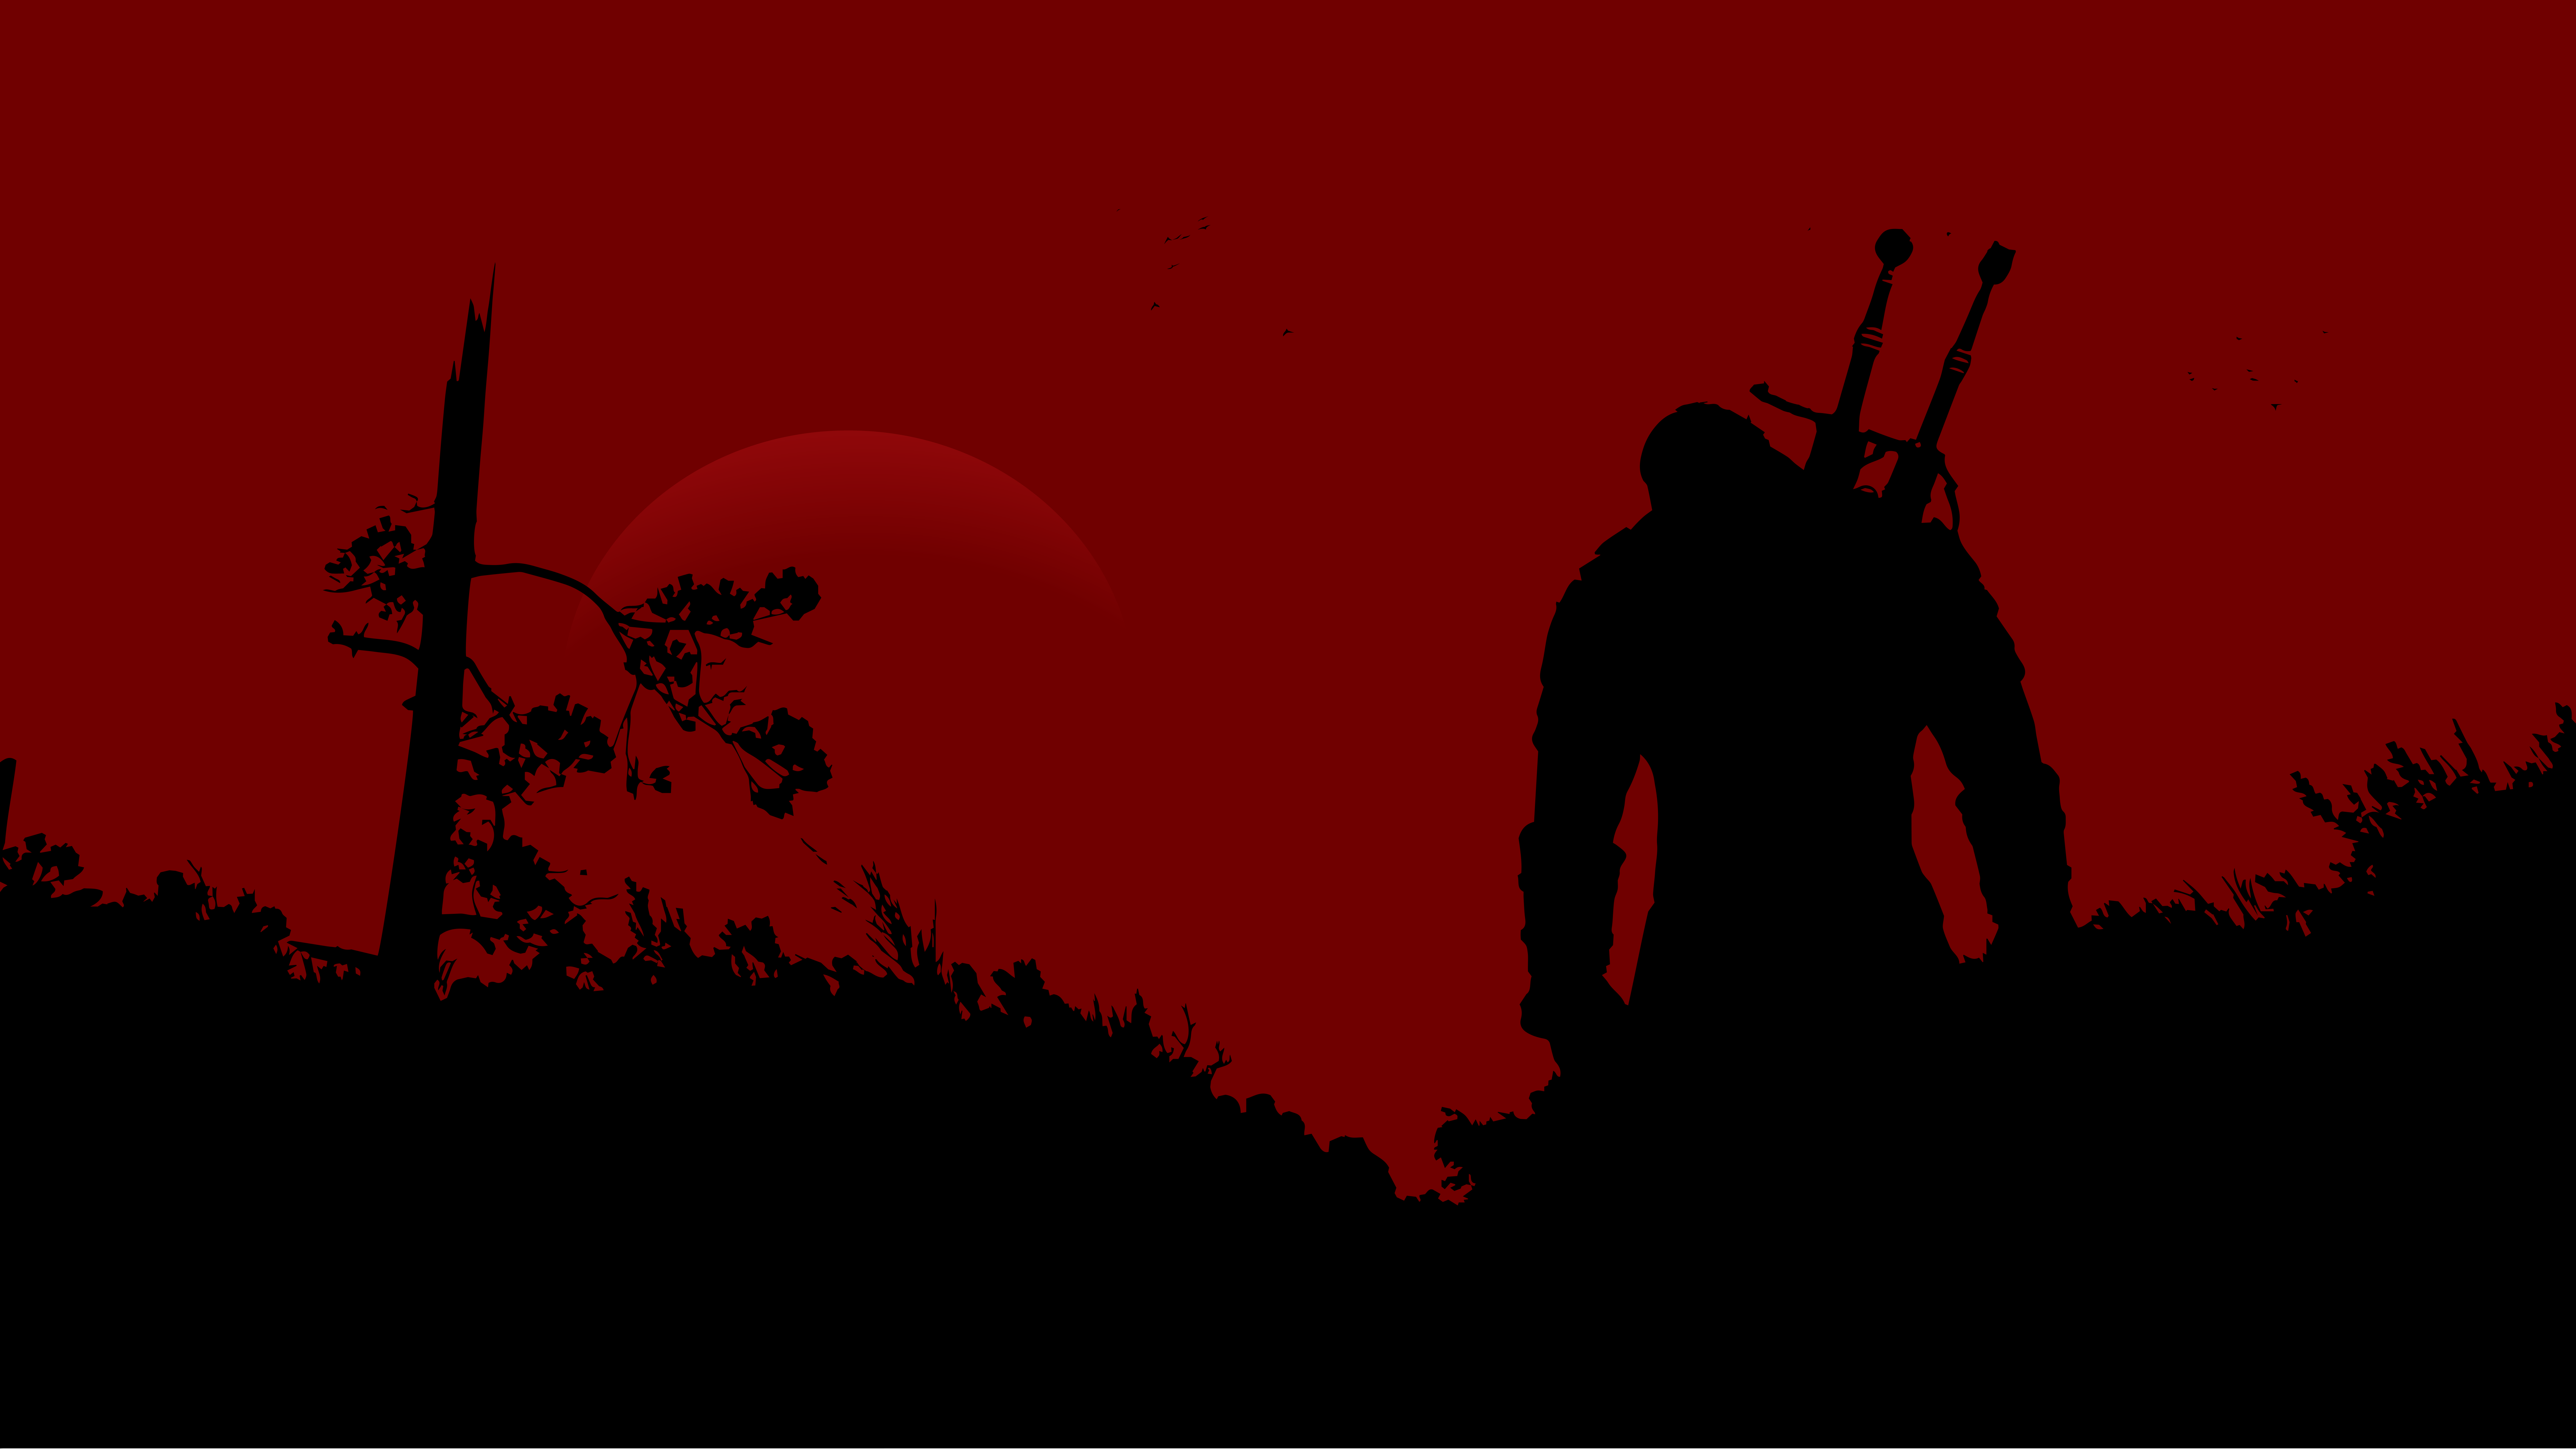 Minimalist Wallpaper Red Black #TheWitcher3 #PS4 #WILDHUNT #PS4share #games #gaming #TheWitcher #TheWitcher3WildHu. Minimalist Wallpaper, Wallpaper, Black